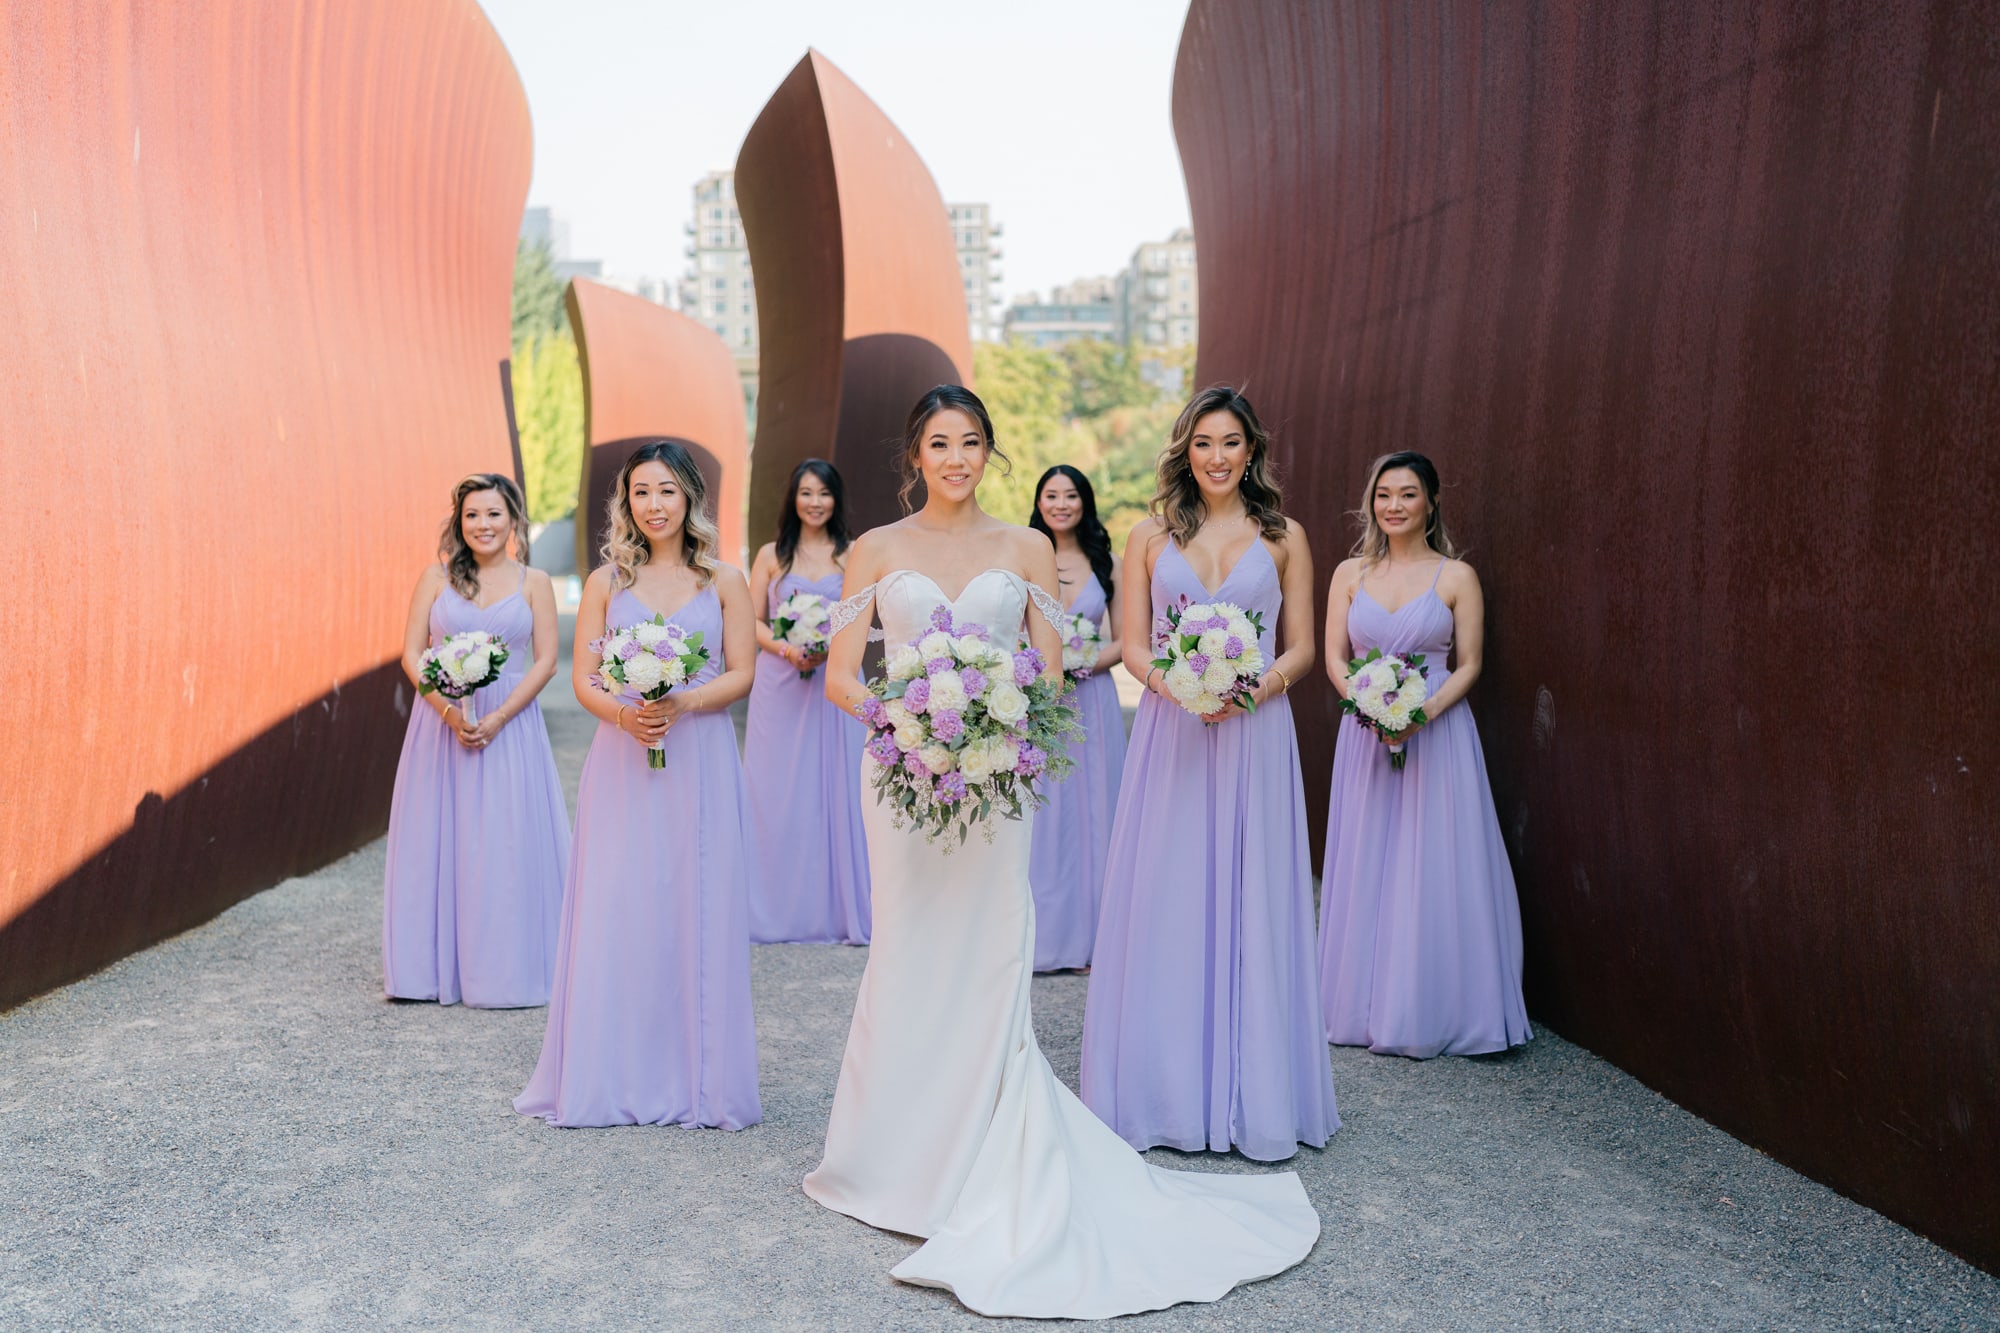 A bride posing with her bridesmaids in a formal bridal party photo at Olympic Sculpture Park in Seattle.